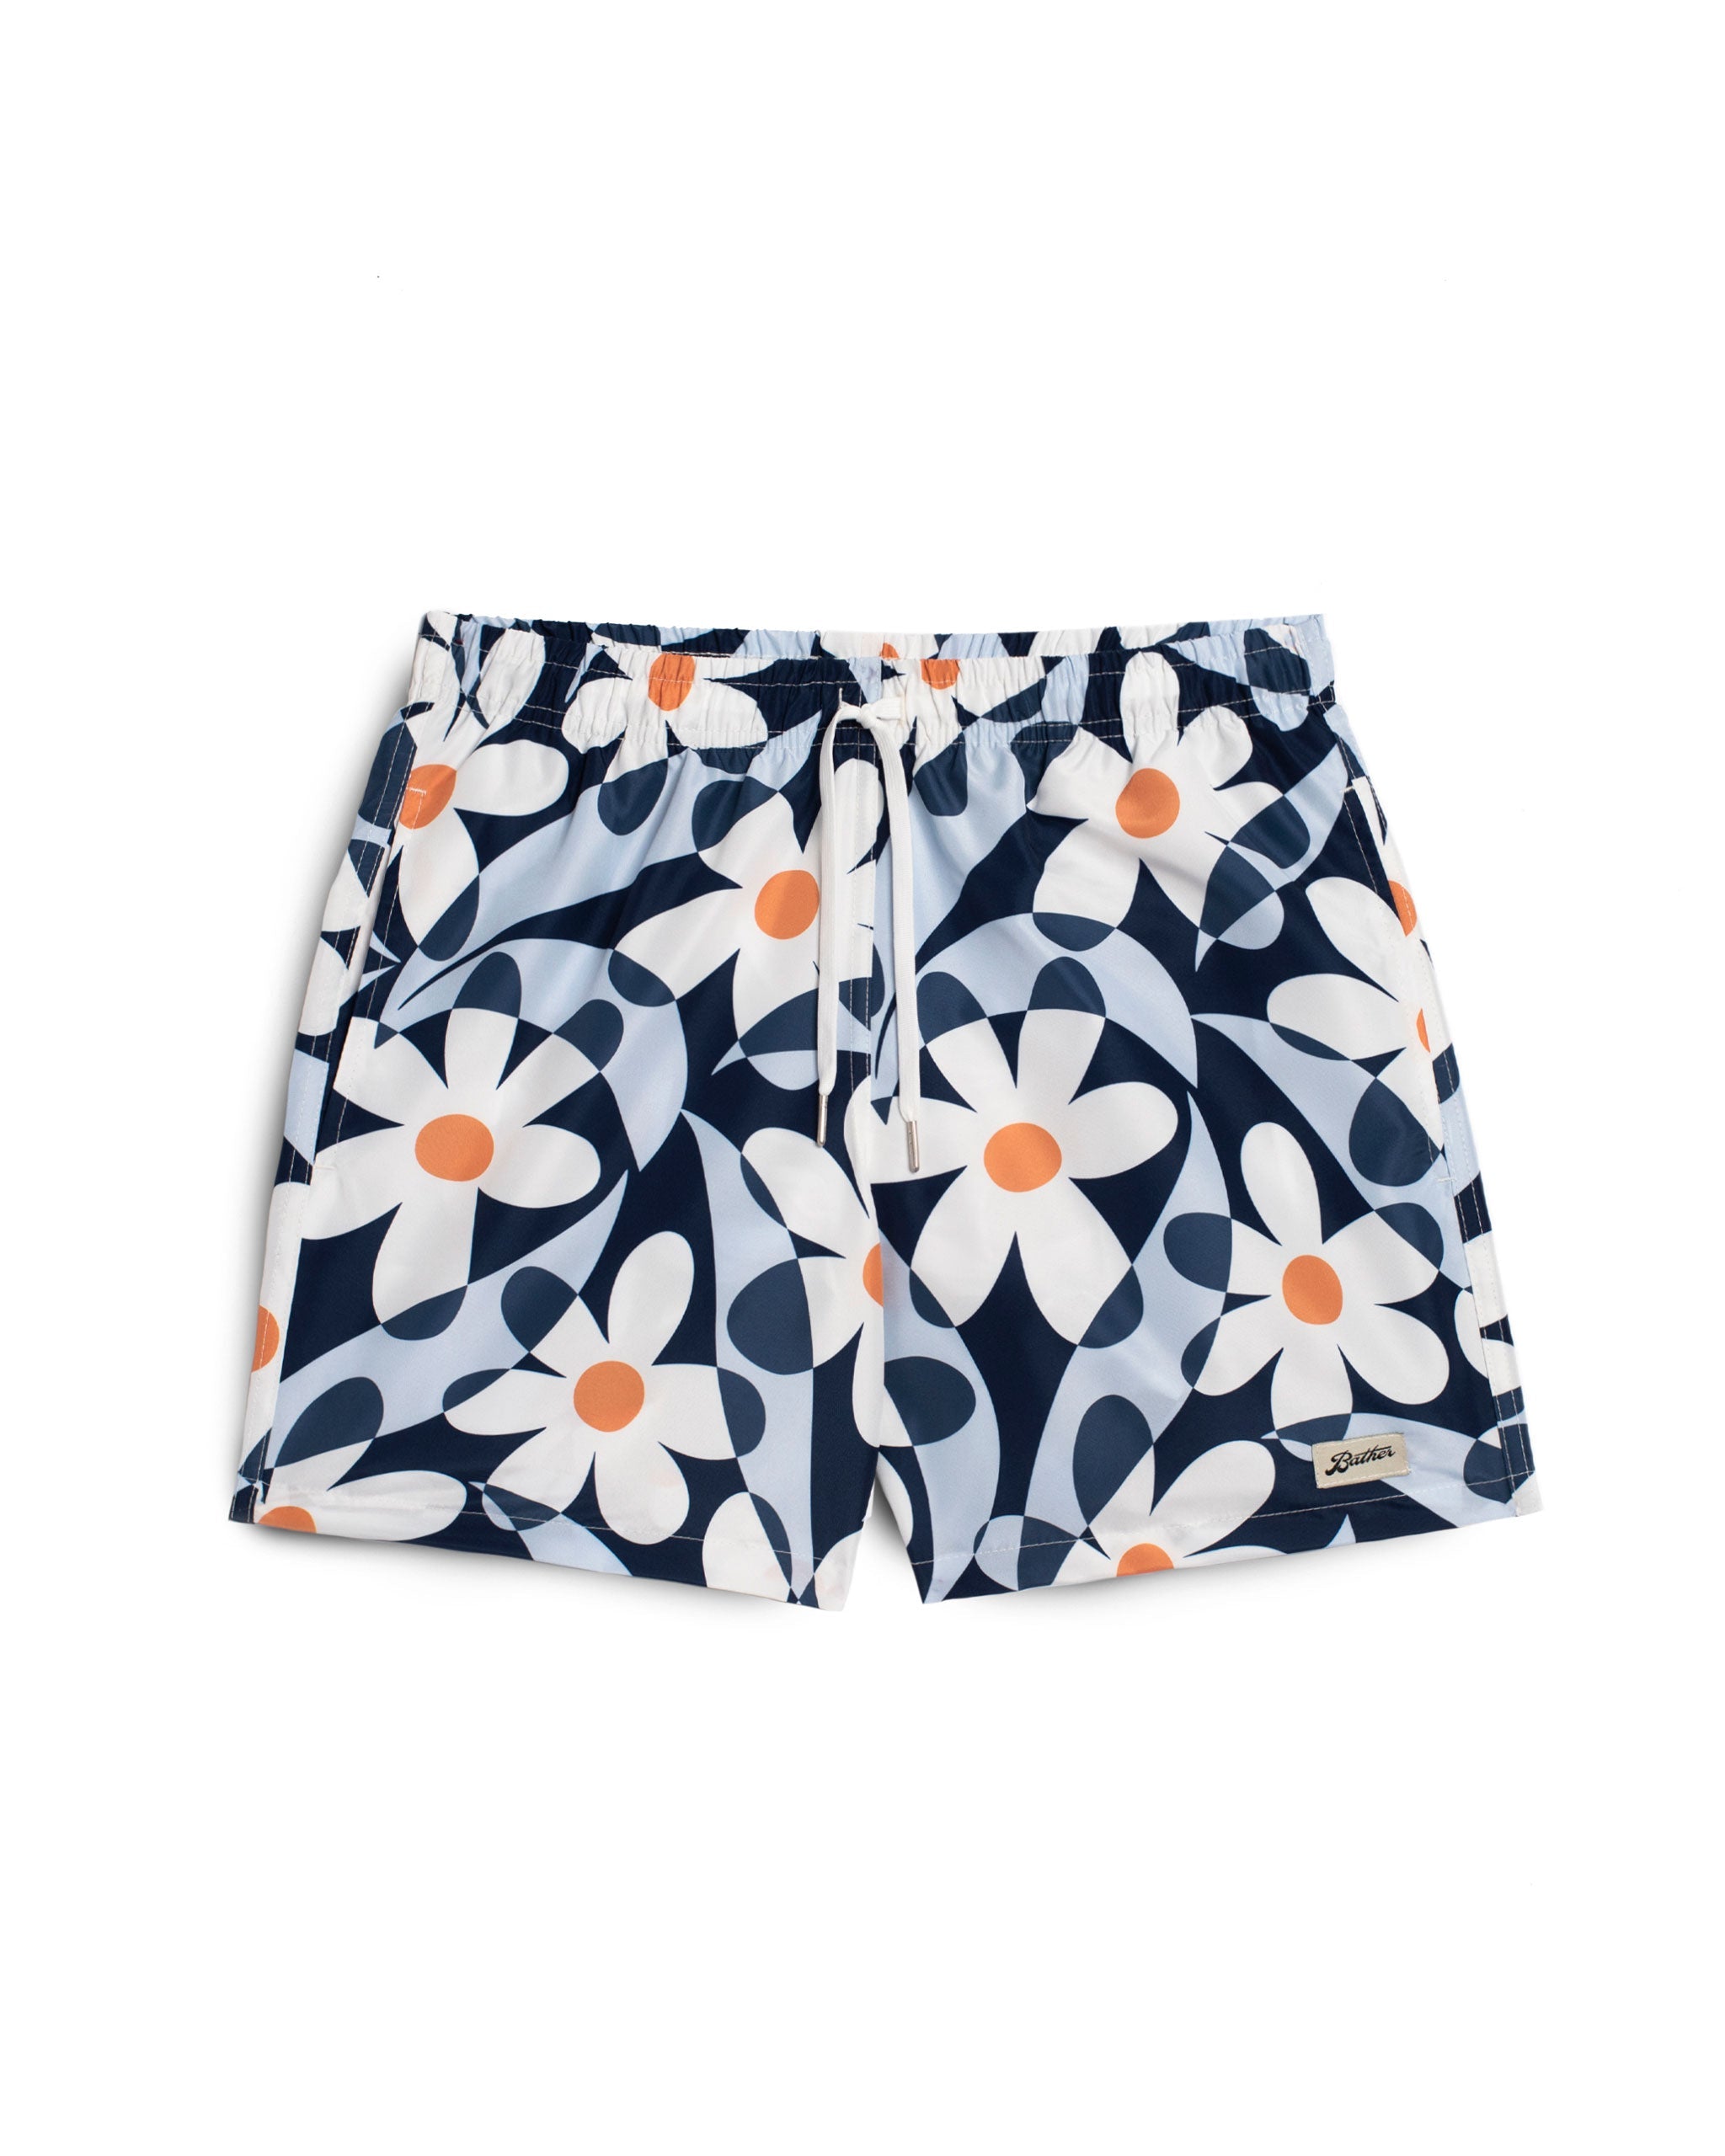 Front shot of bather swim trunks with abstract daisy pattern